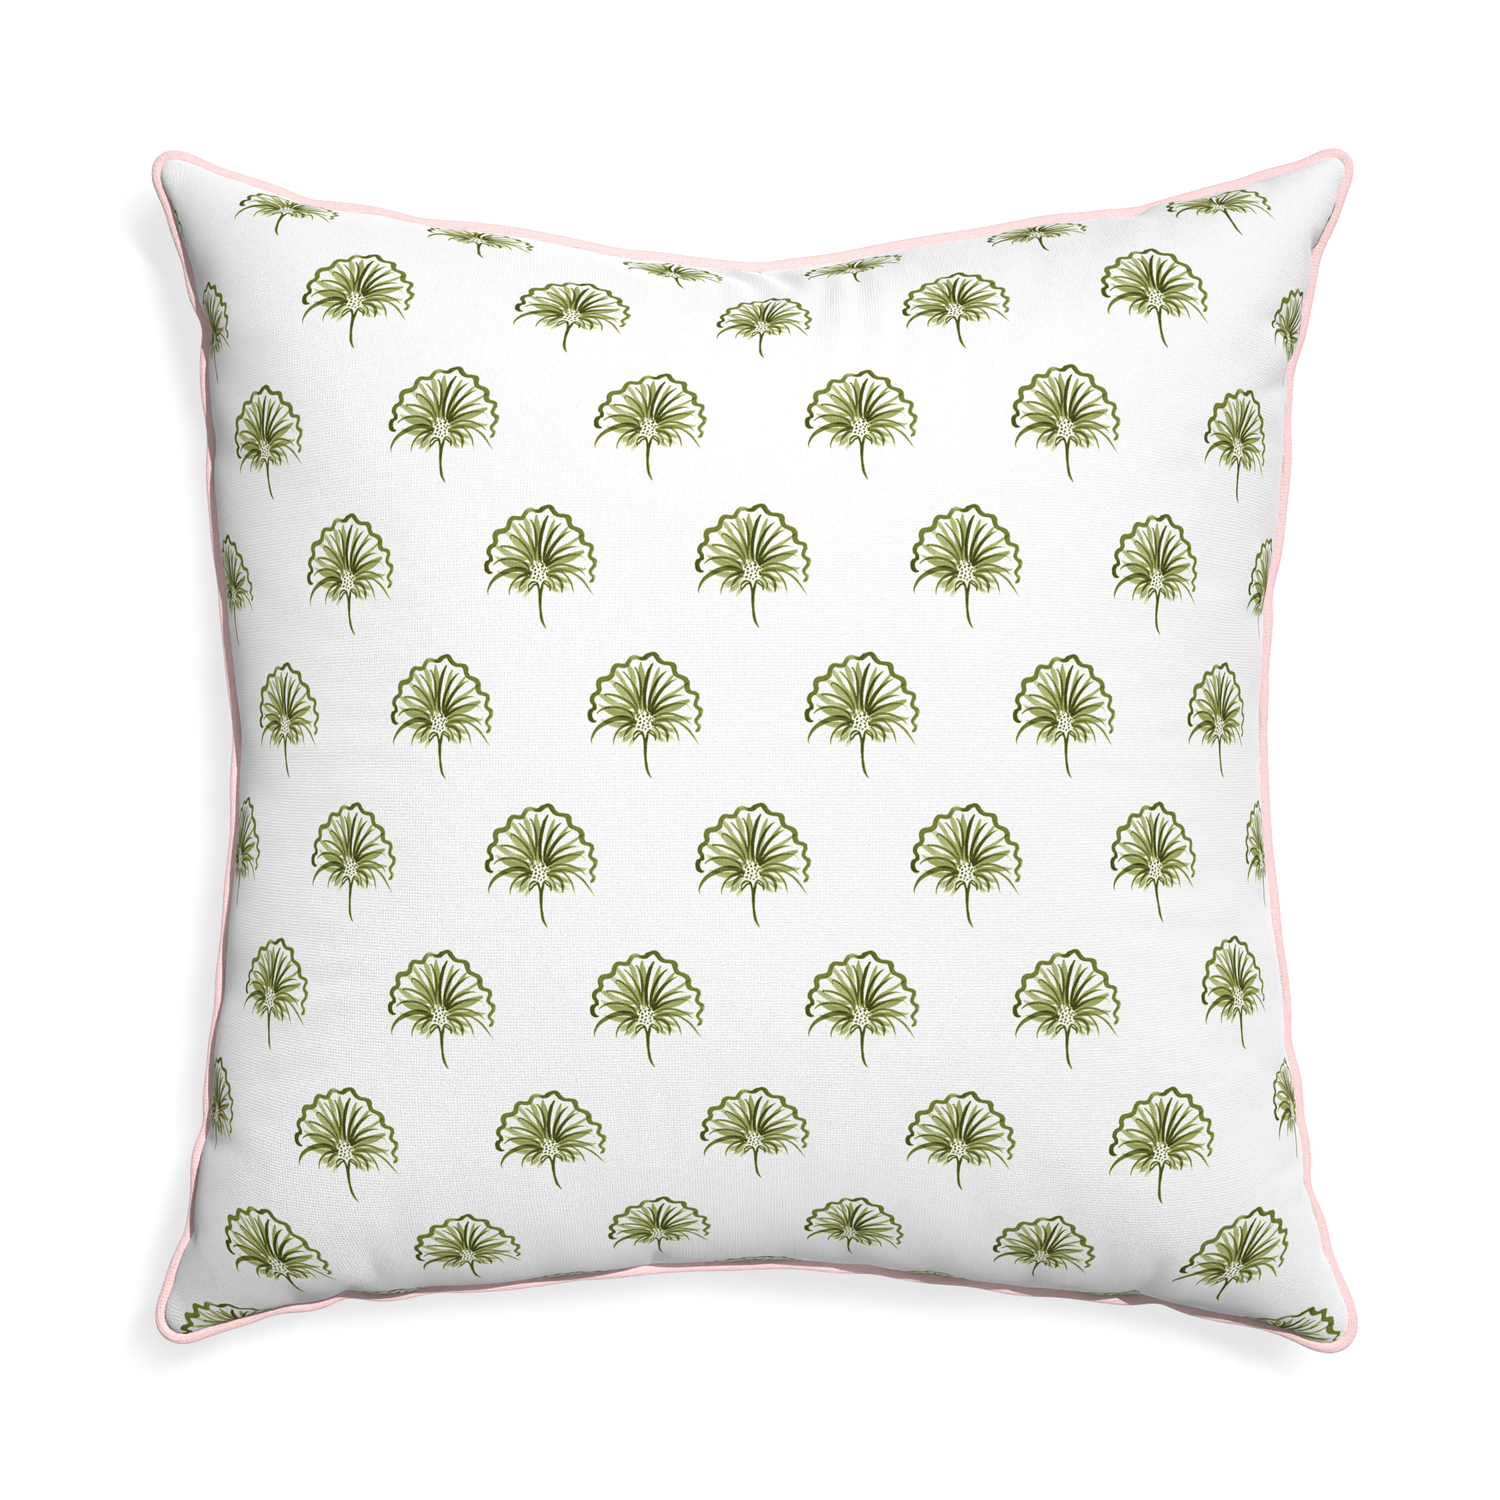 Euro-sham penelope moss custom green floralpillow with petal piping on white background